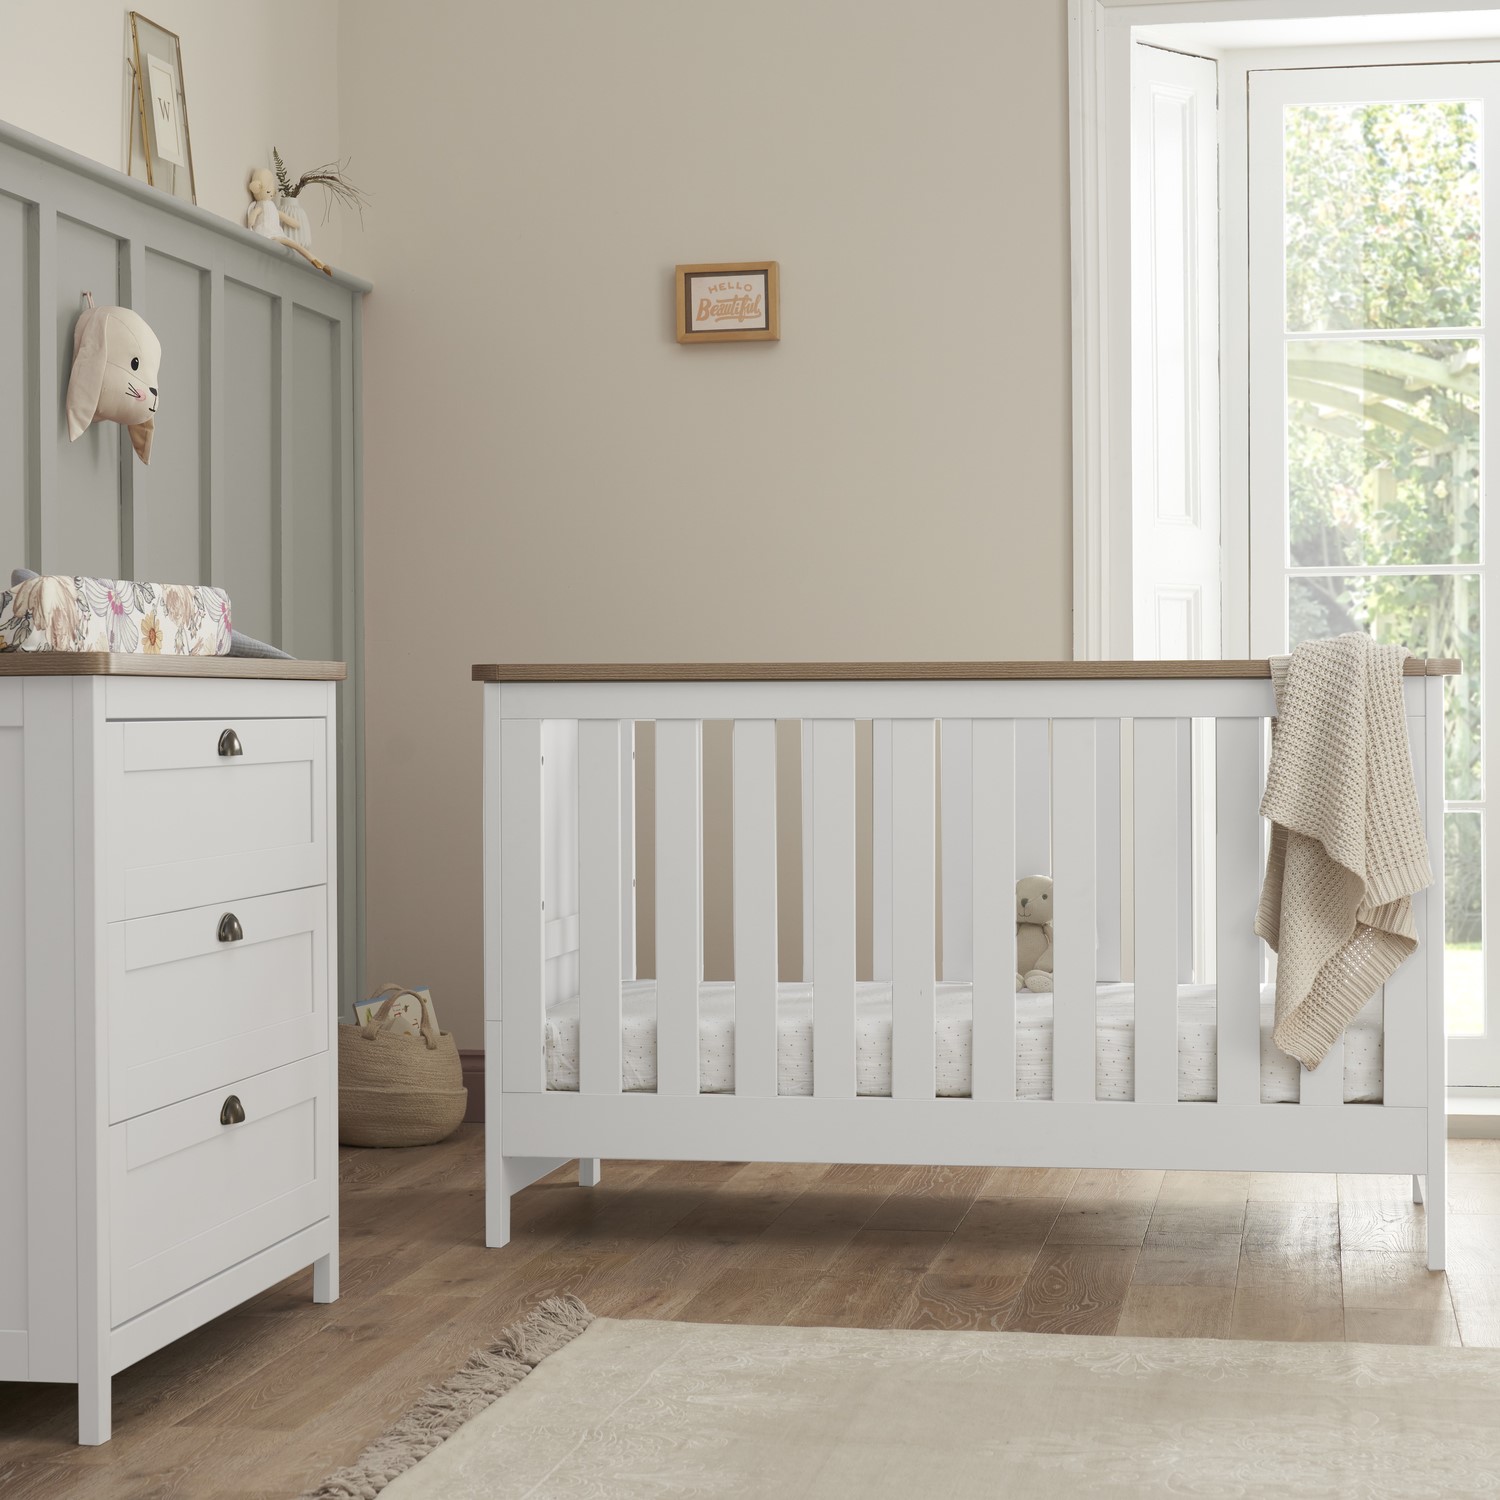 Photo of 2 piece nursery furniture set with cot bed and changing table in white and oak - verona - tutti bambini